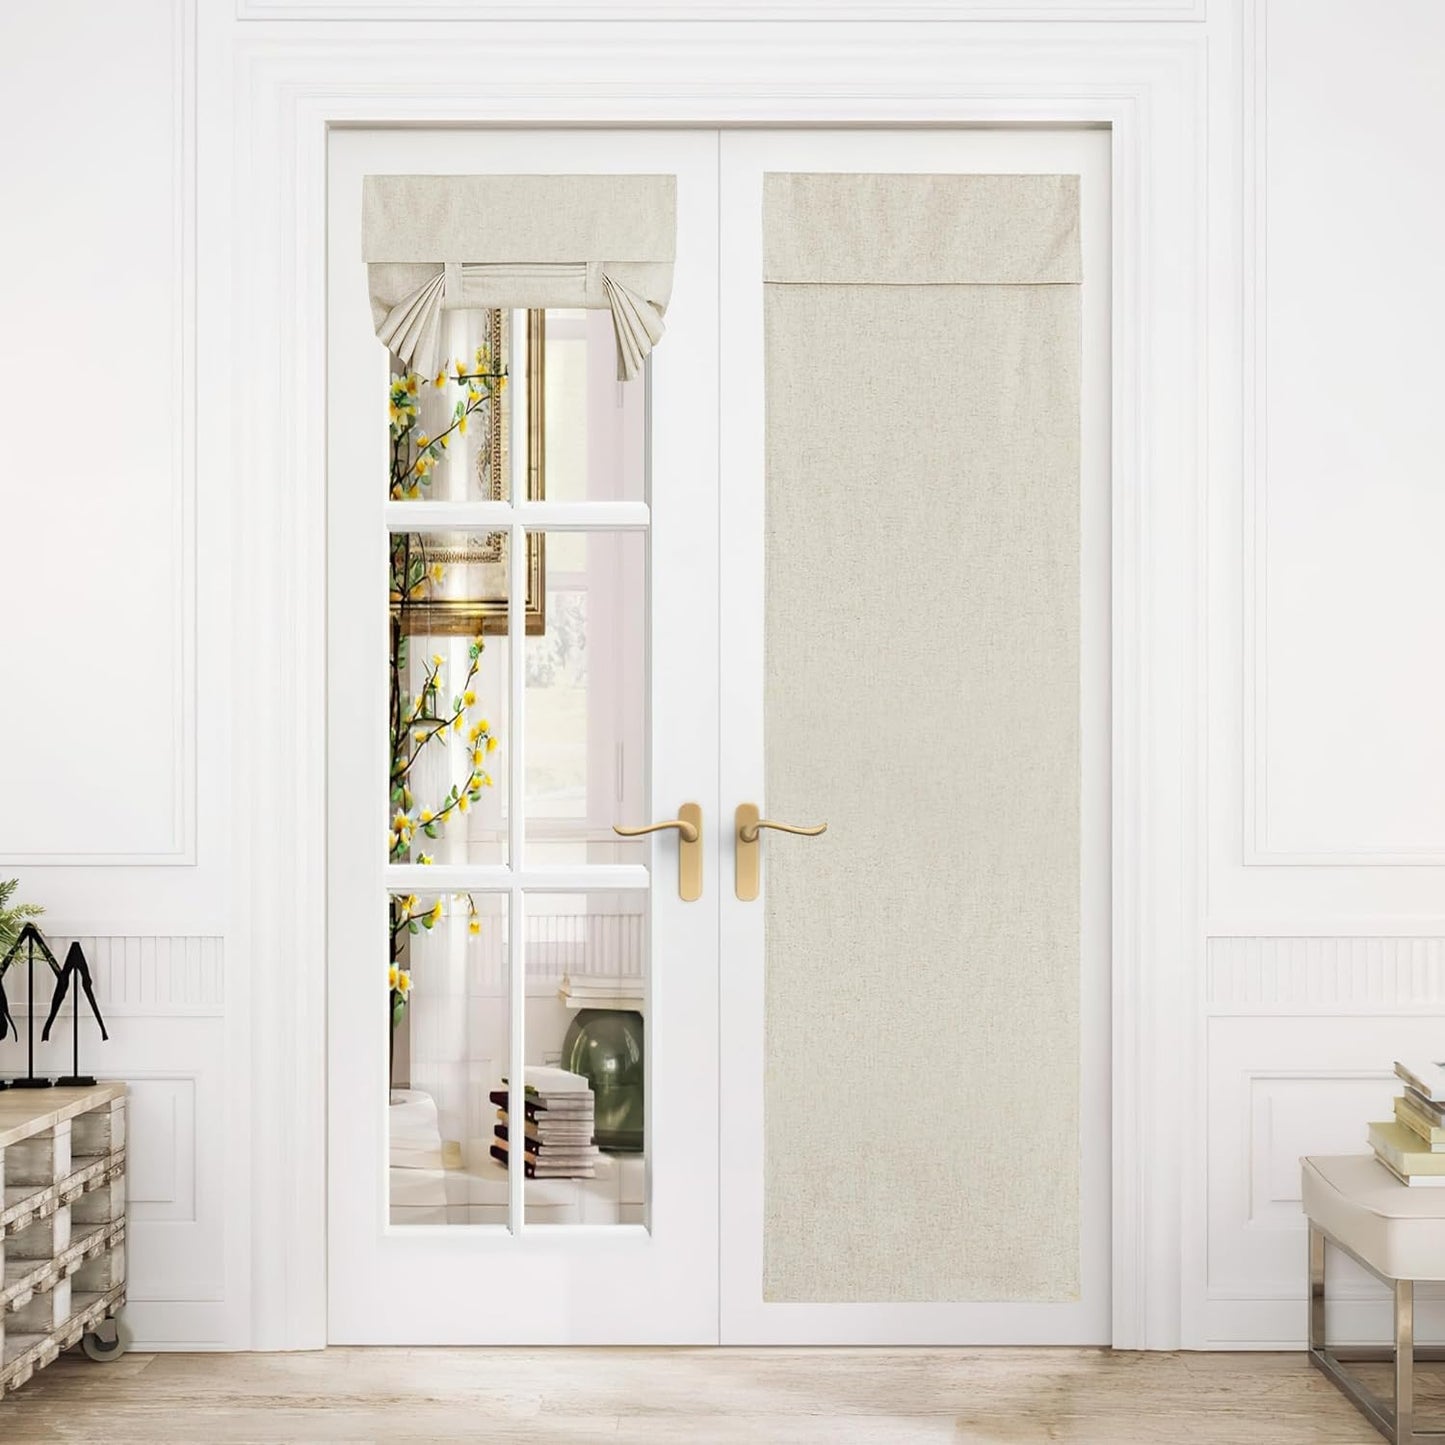 NICETOWN Linen Door Curtain for Door Window, Farmhouse French Door Curtain Shade for Kitchen Bathroom Energy Saving 100% Blackout Tie up Shade for Patio Sliding Glass, 1 Panel, Natural, 26" W X 72" L  NICETOWN Natural W26 X L80 